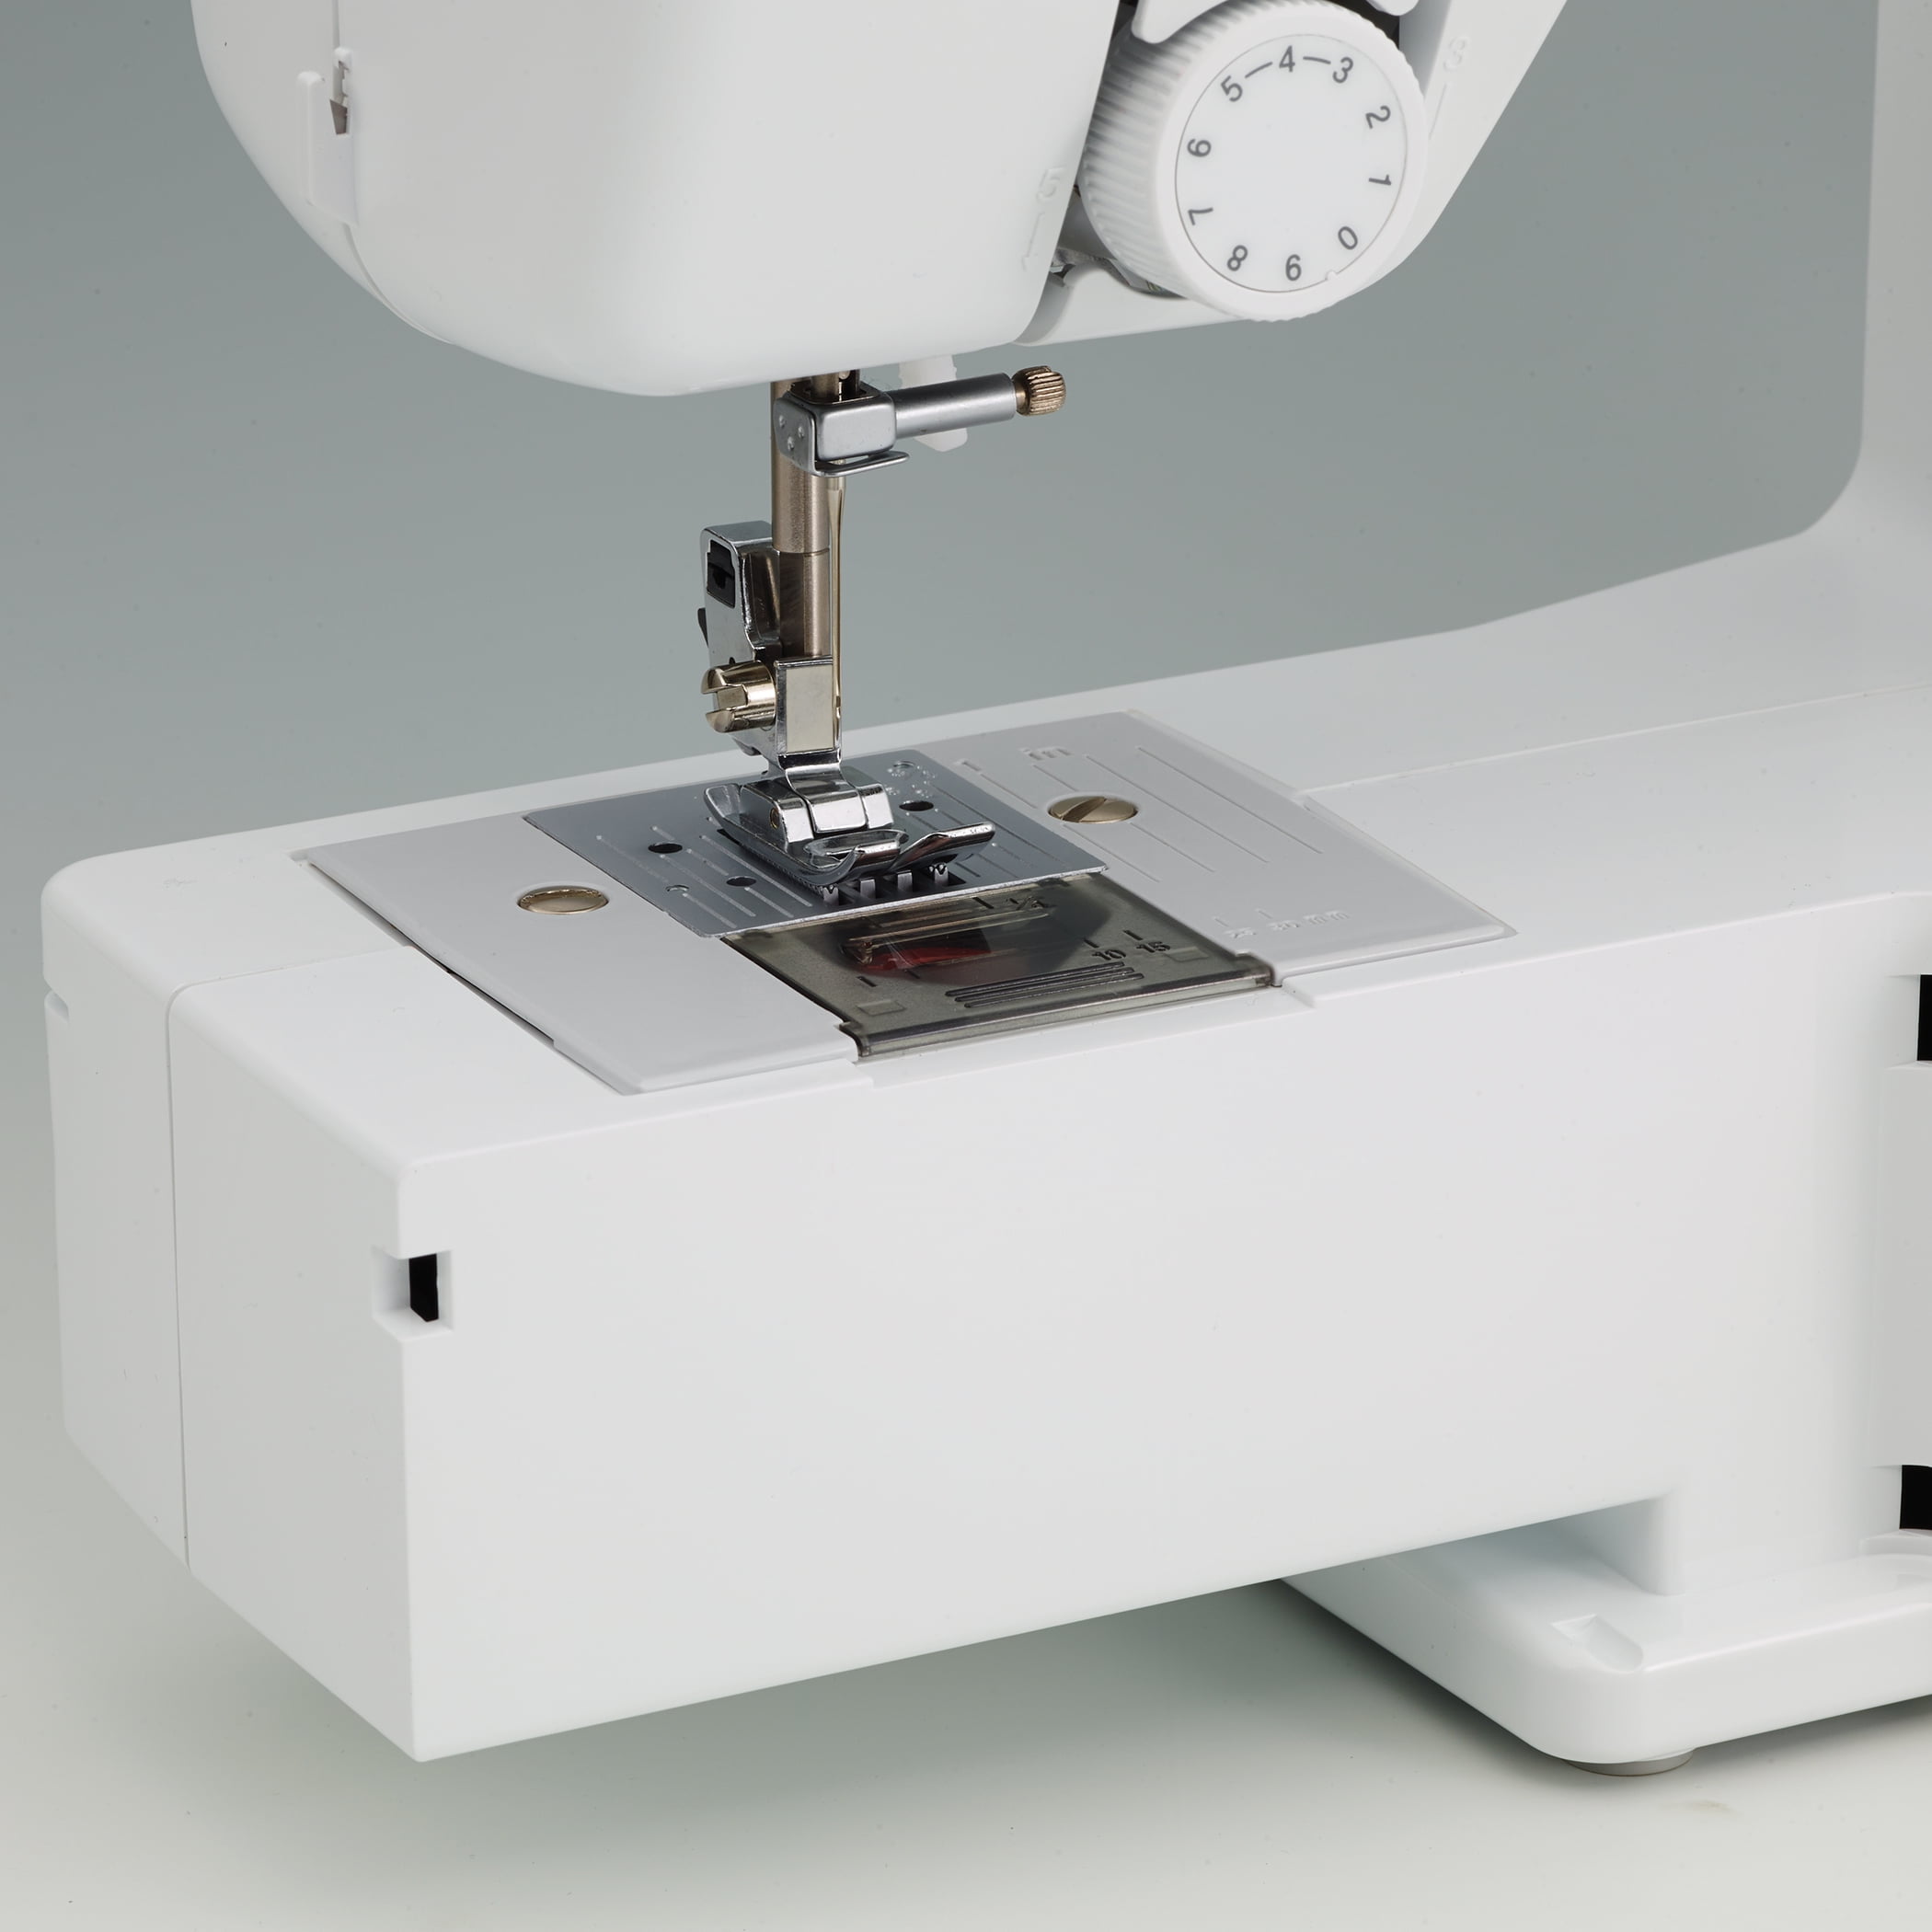 Brother Sm1704 Lightweight, Full Size Sewing Machine With 17 Stitches And 4  Sewing Feet 